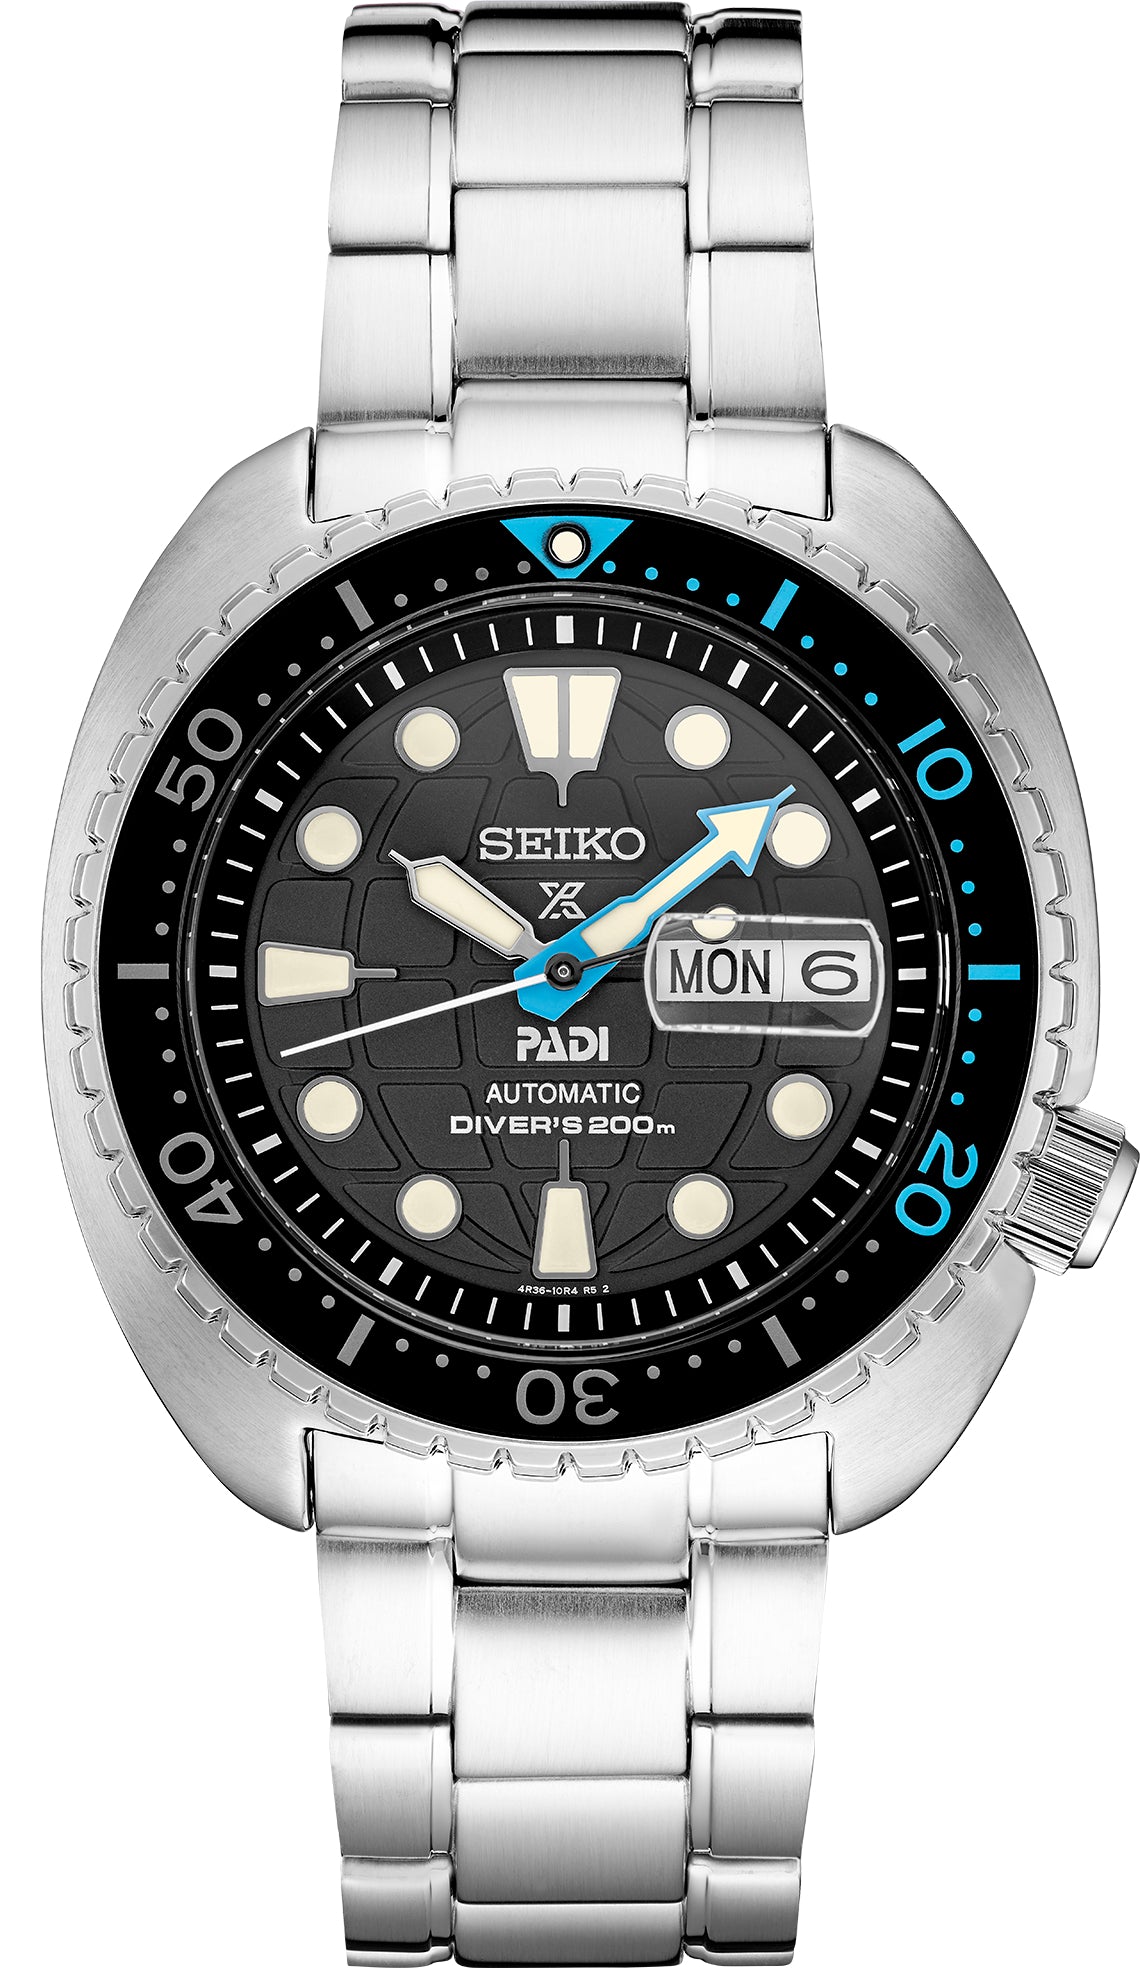 Seiko Men's Prospex Stainless Watch in color Silver-Tone, Black from the front view